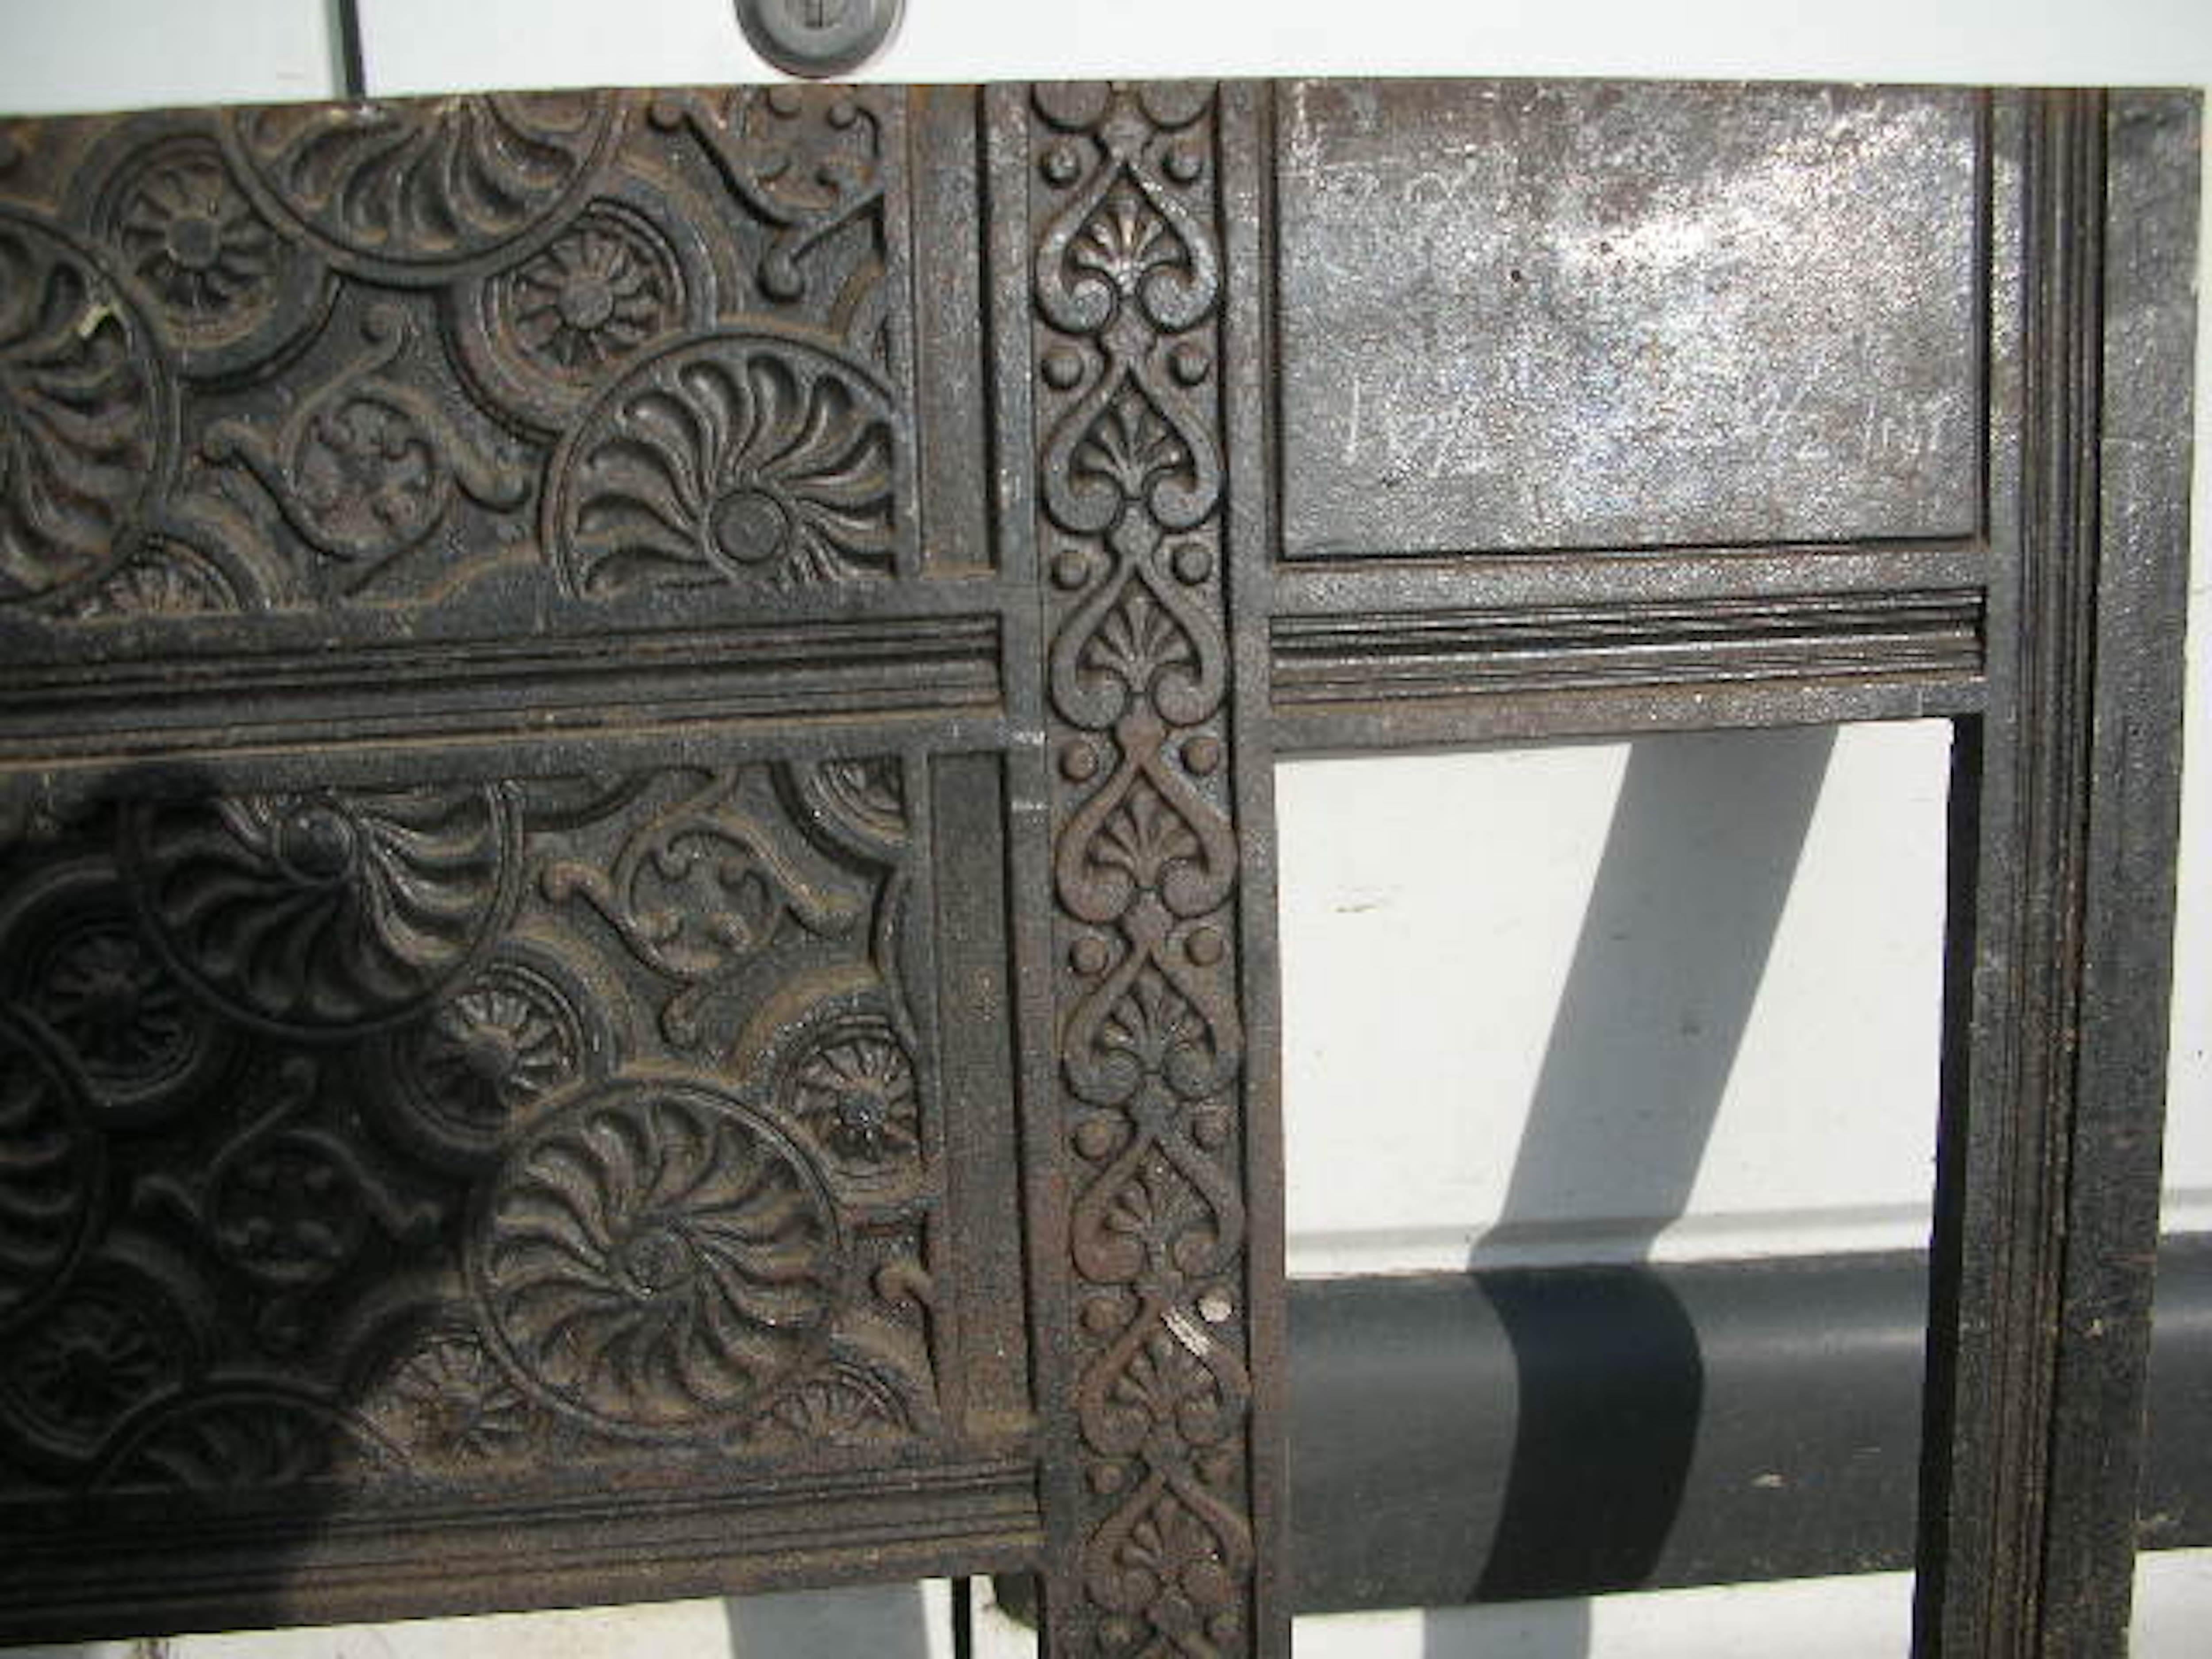 Thomas Jeckyll. An Aesthetic Movement cast iron fire insert with stylized flower details.
Made by Barnard Bishop and Barnard of Norwich.
This insert takes ten standard 6 inch square period tiles which fit easily from the back.
Measures: Height 38